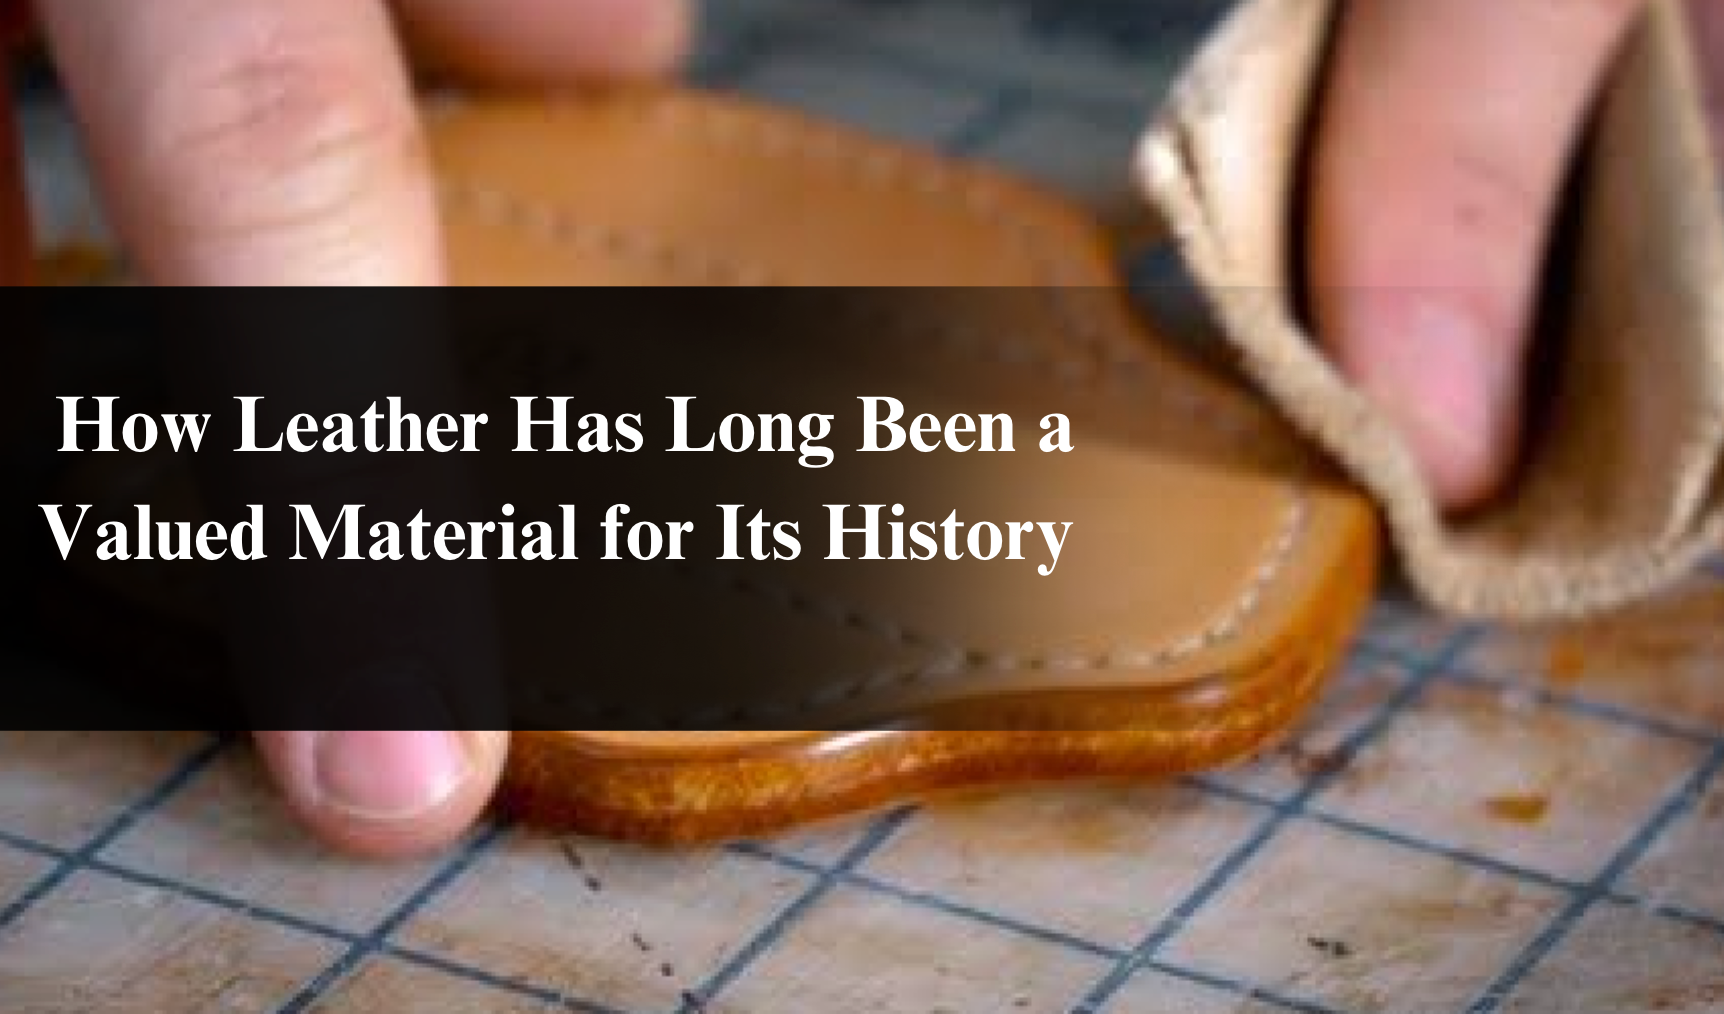 How Leather Has Long Been a Valued Material for Its History